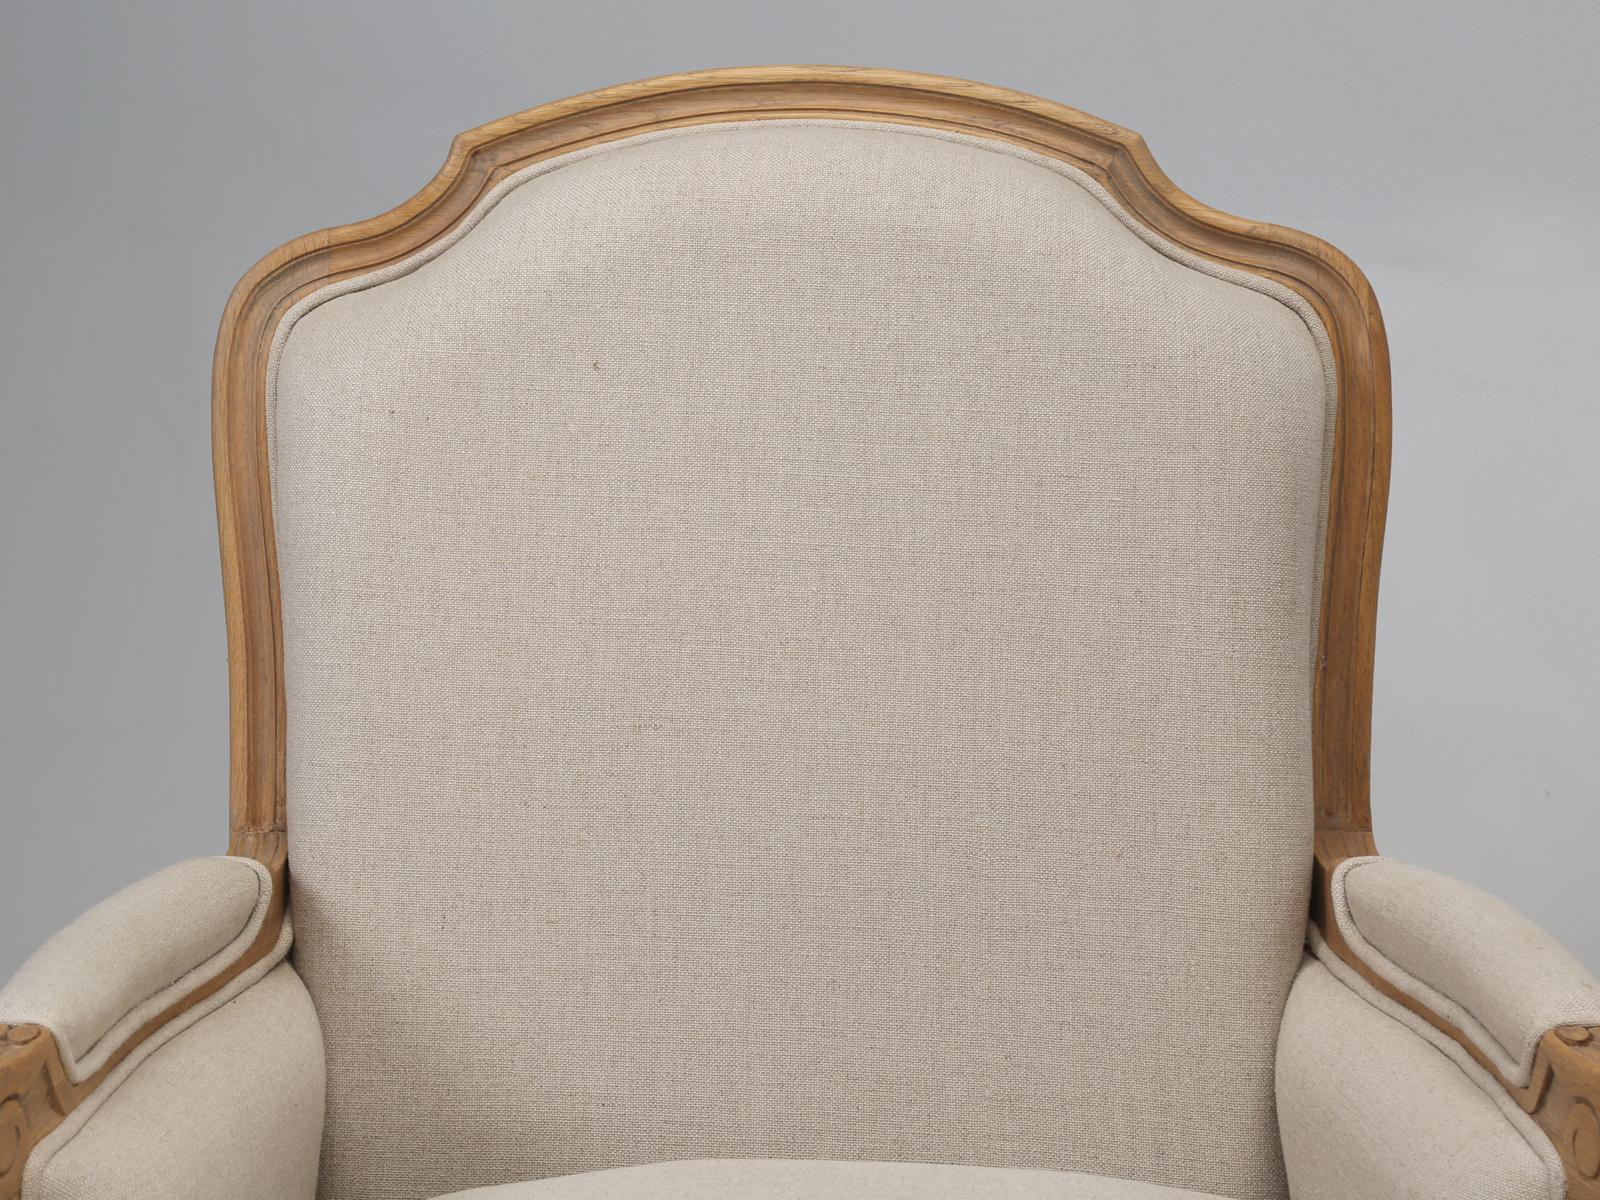 Pair of French style bergère chairs, that are defined as an enclosed upholstered armchair and are fully upholstered. Most bergère chairs are fitted with a loose, tailored seat cushion, that was designed for the utmost in comfort and relaxation. The